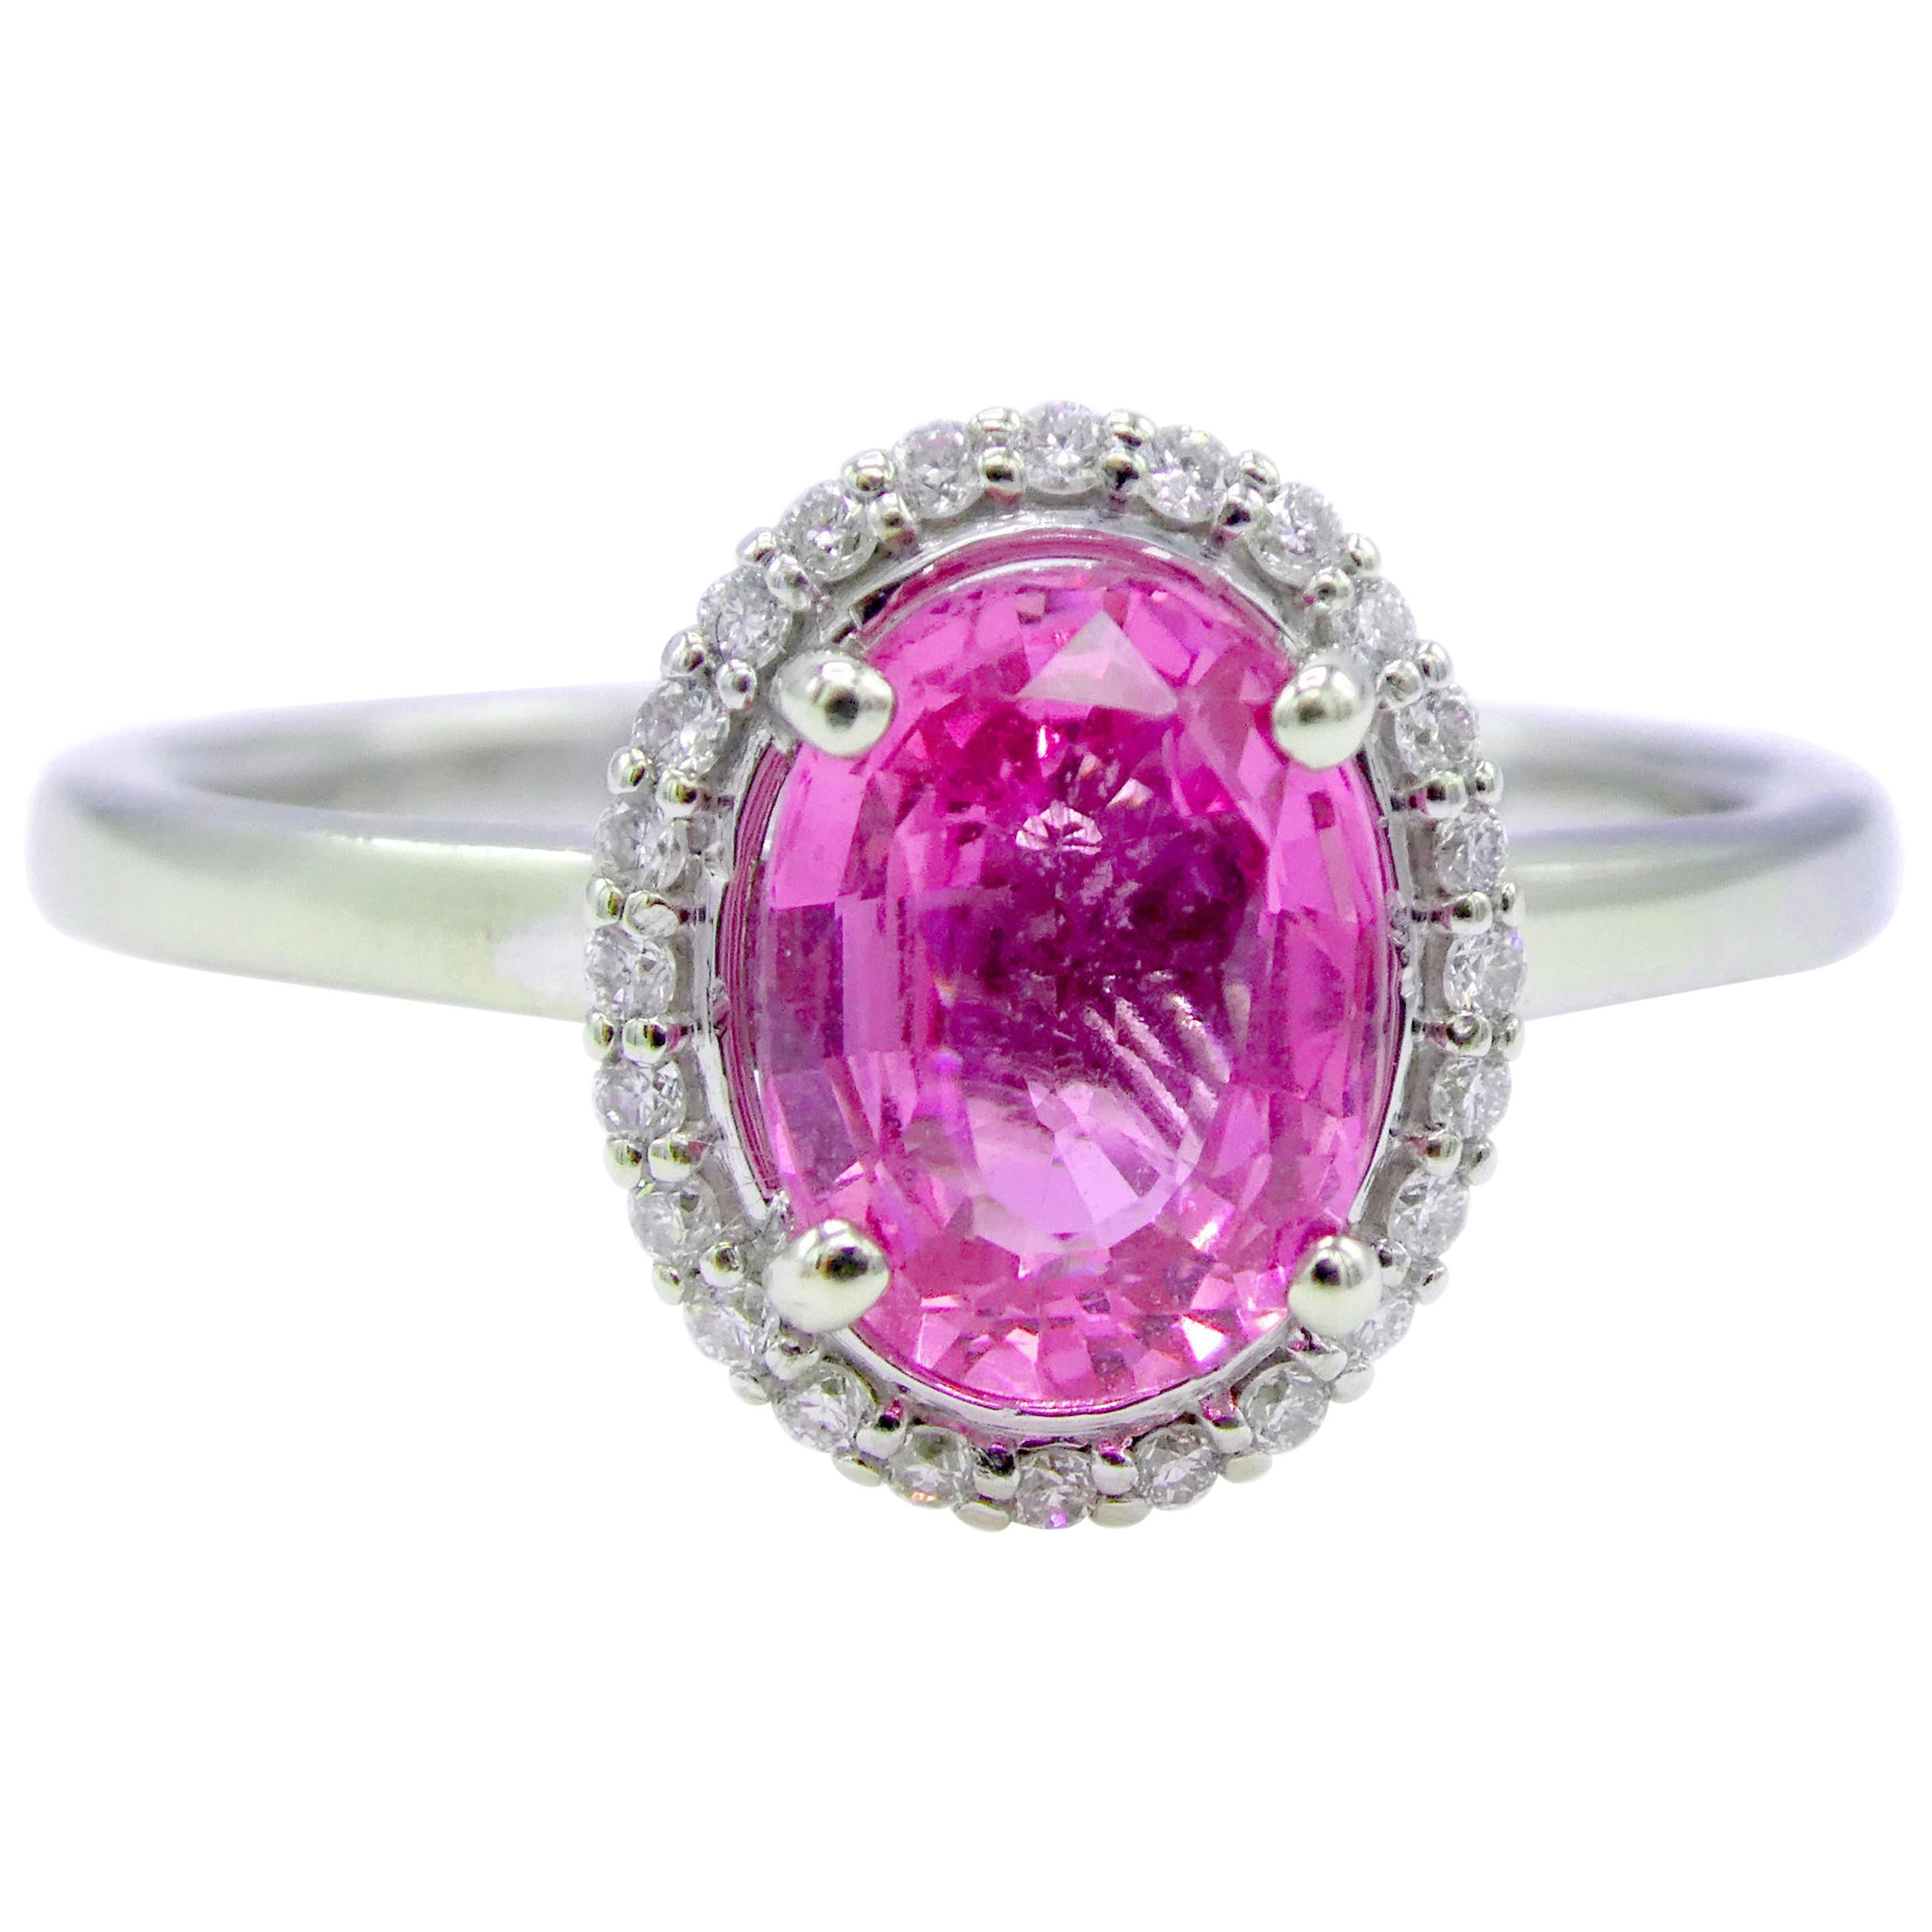 GIA Certified 1.49 Carat Oval Pink Sapphire and Diamond Cocktail Ring